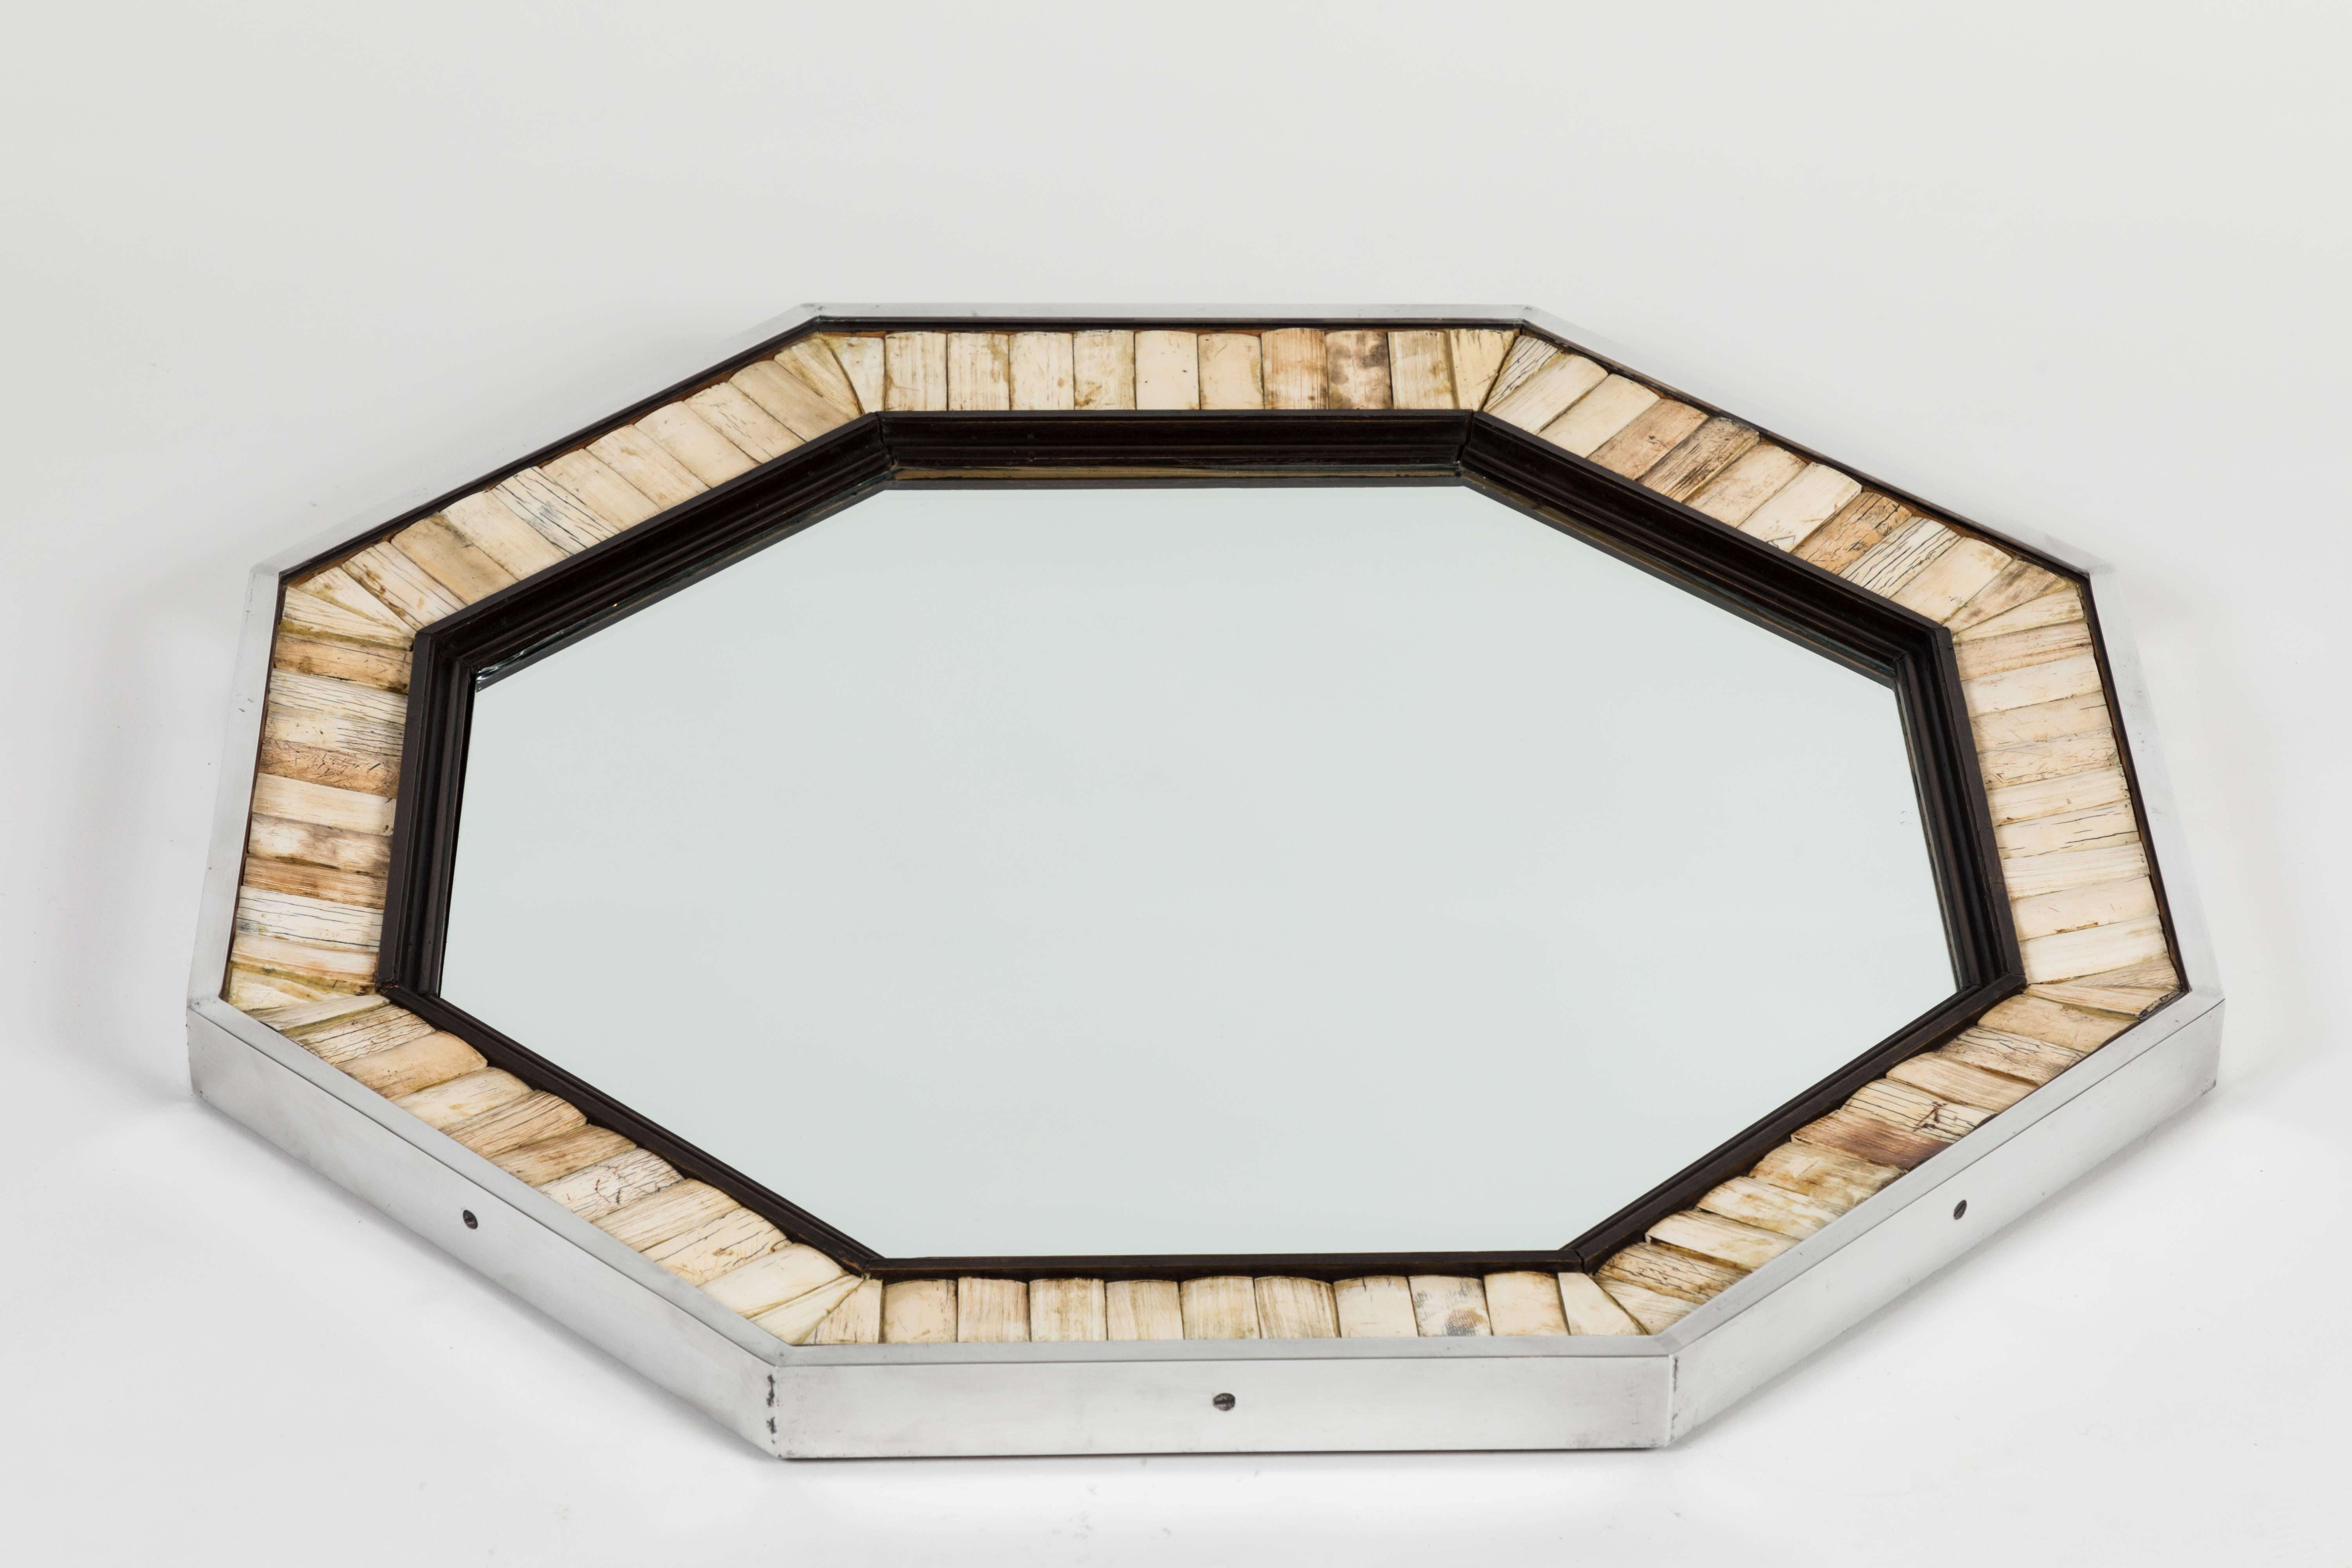 Wonderful and stylish mirror framed in ebonized wood surrounded by bone inlays and finished with a polished aluminum surround. Though unsigned, the work of 1970s London designer Antony Redmile, this mirror is a variation of several signed versions I